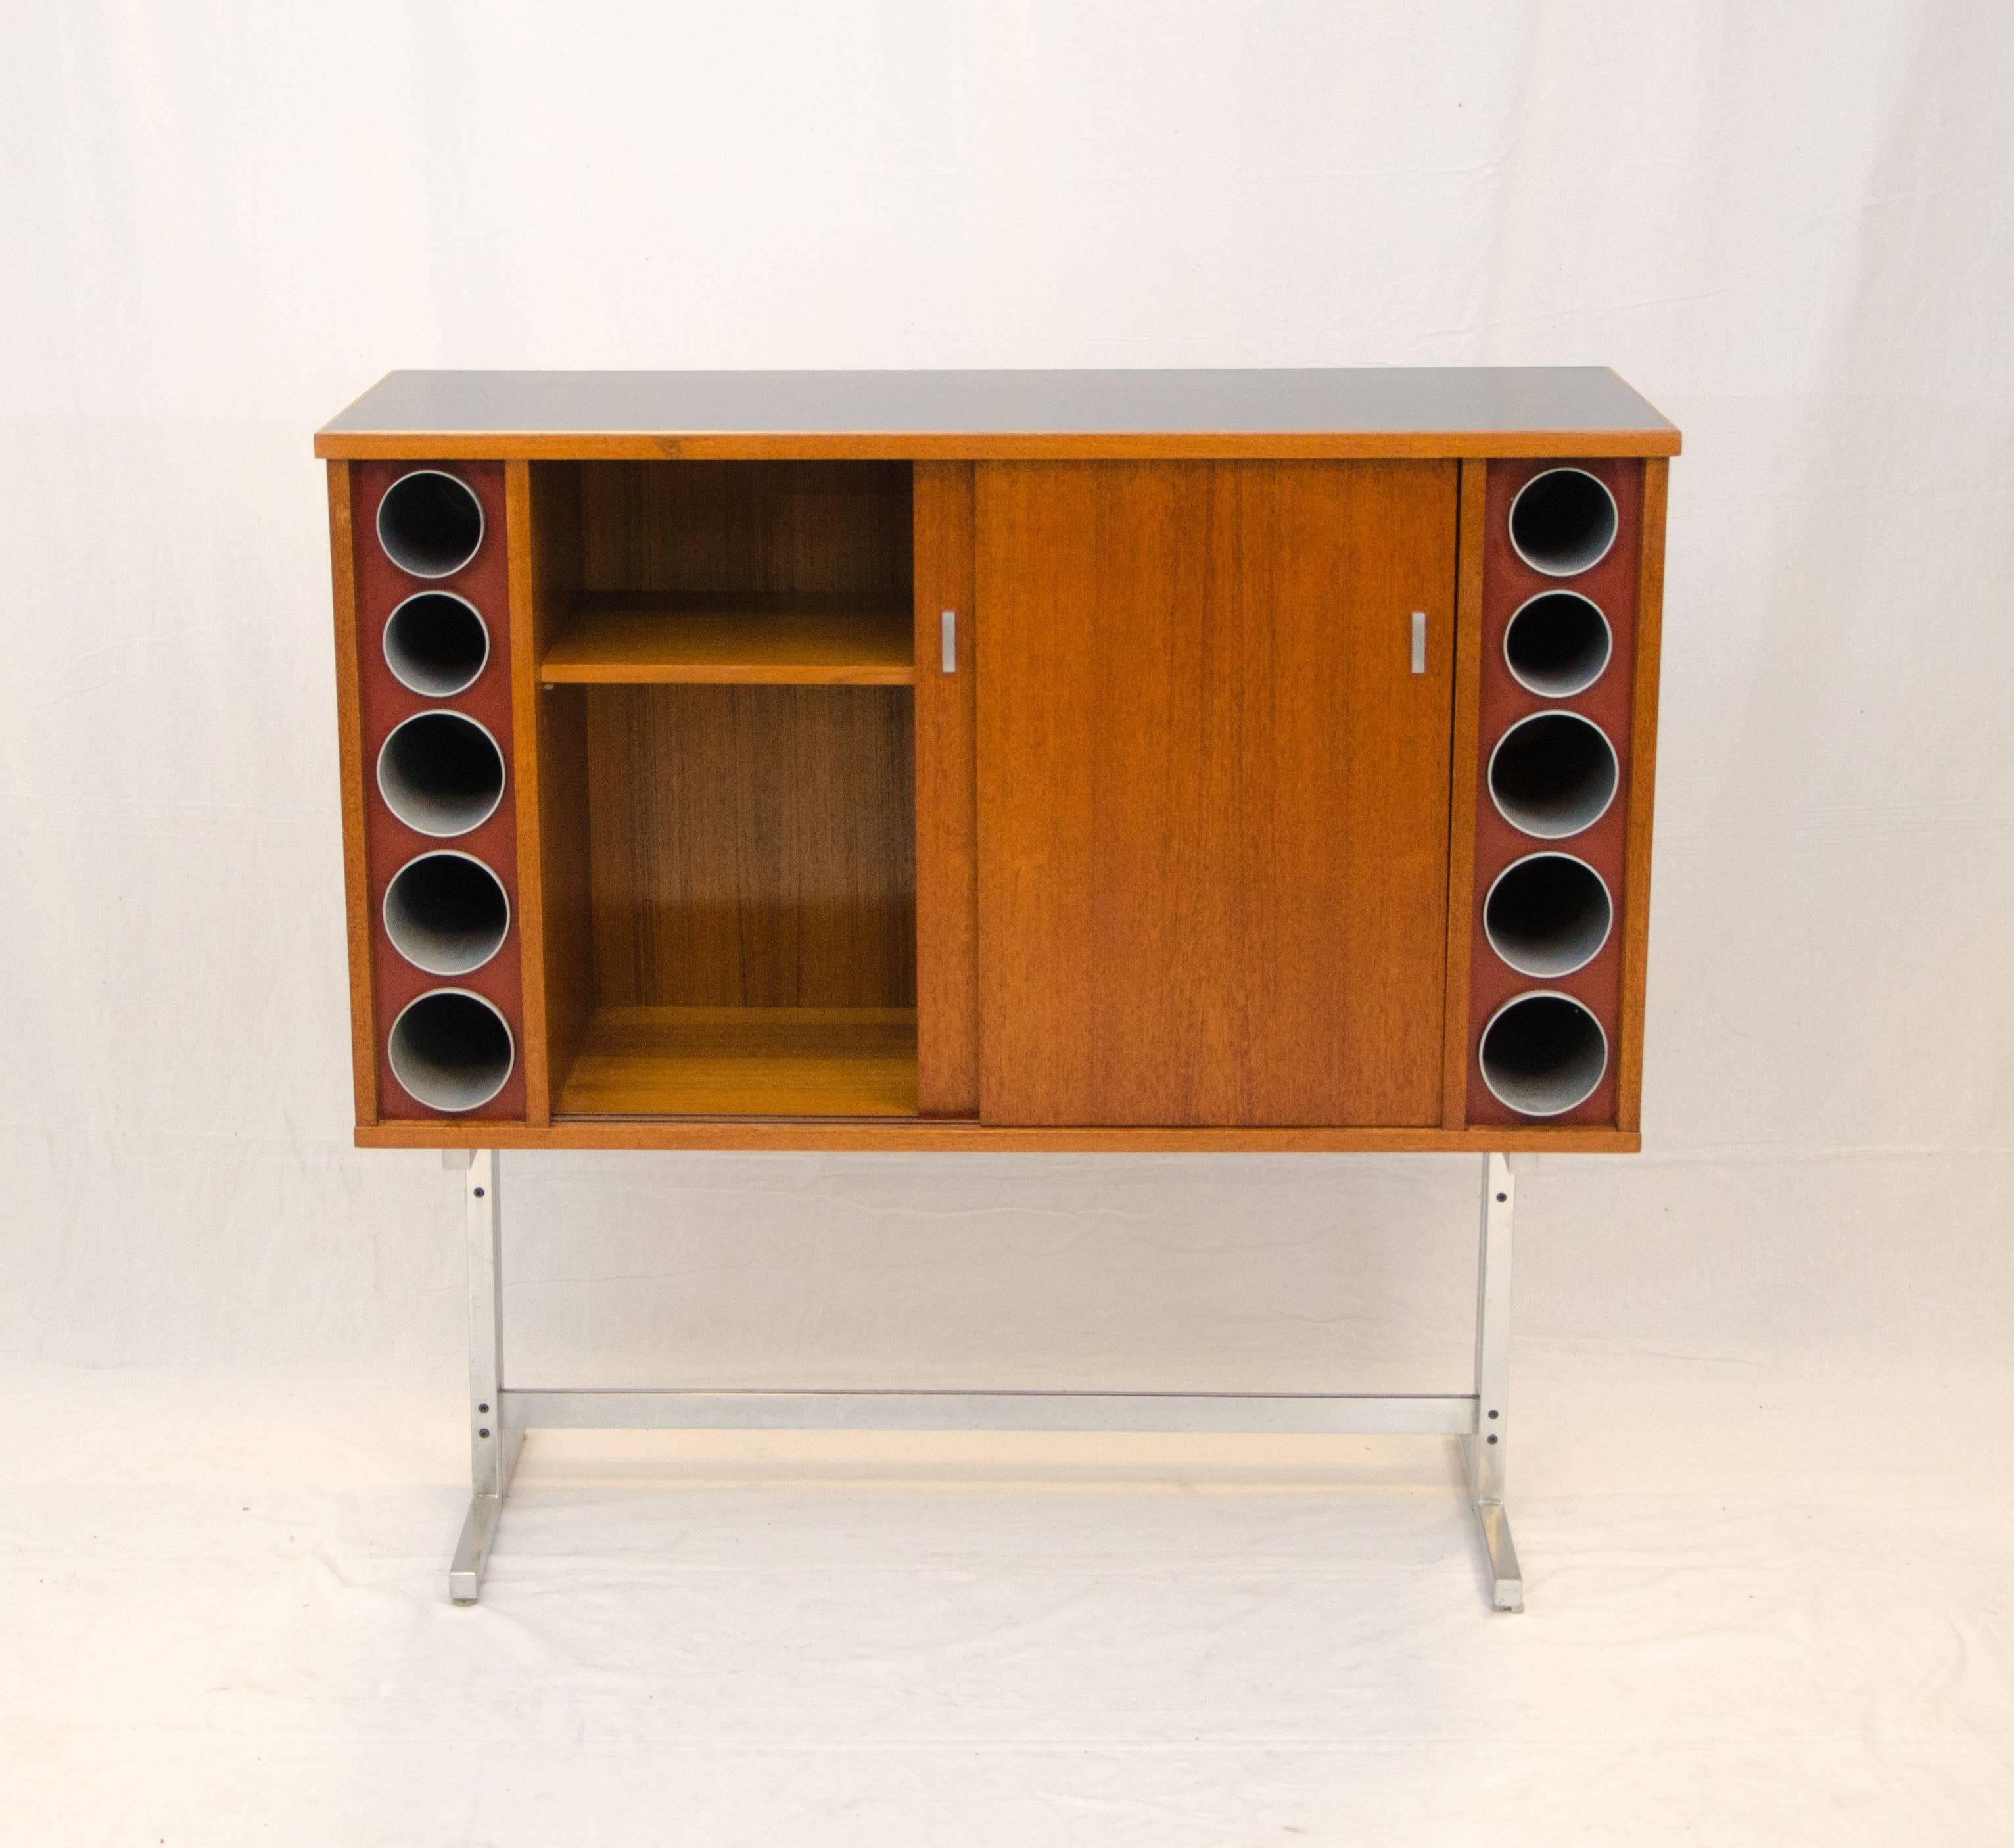 An unusual bar or cocktail cabinet with lots of storage for bottles and glassware and a Formica mixing surface, bottle storage is also available in tubular spaces on both sides of sliding doors. Each set has two 3 1/4" diameter tubes and three